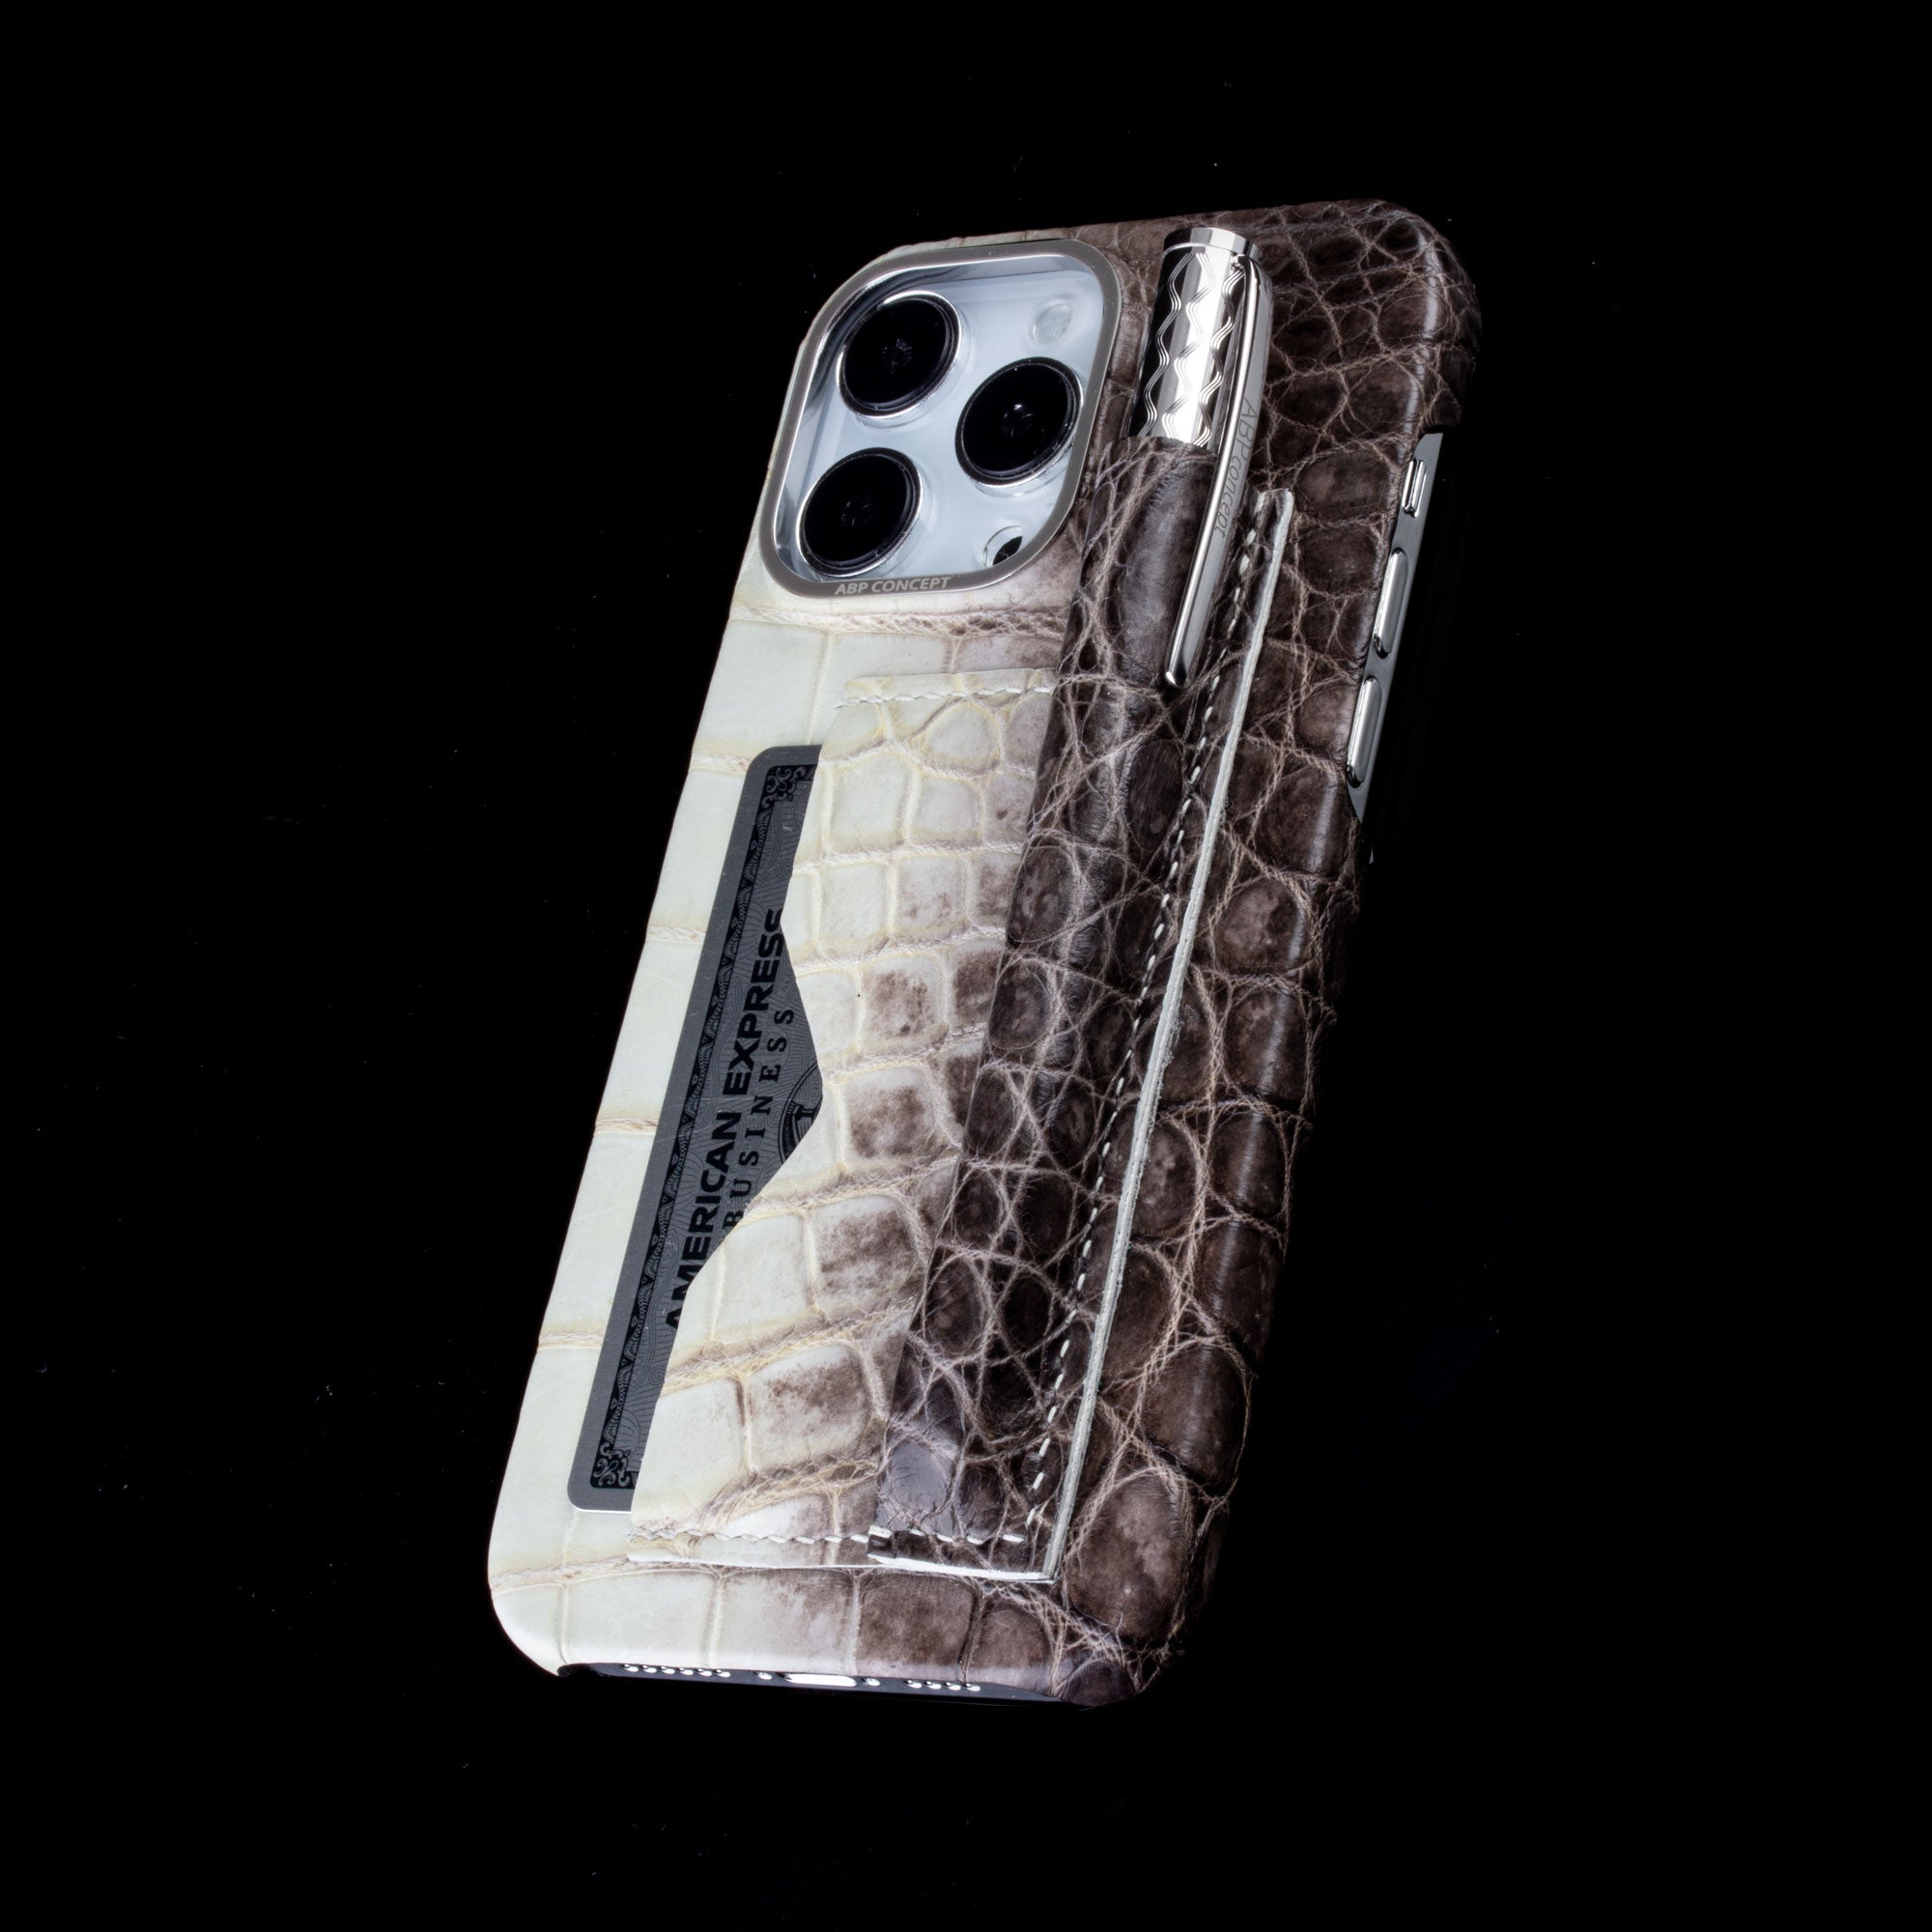 Leather iPhone HIMALAYA "Business case" / cover with credit card pocket and roller pen - iPhone 15, 14 & 13 Pro Max - Genuine alligator